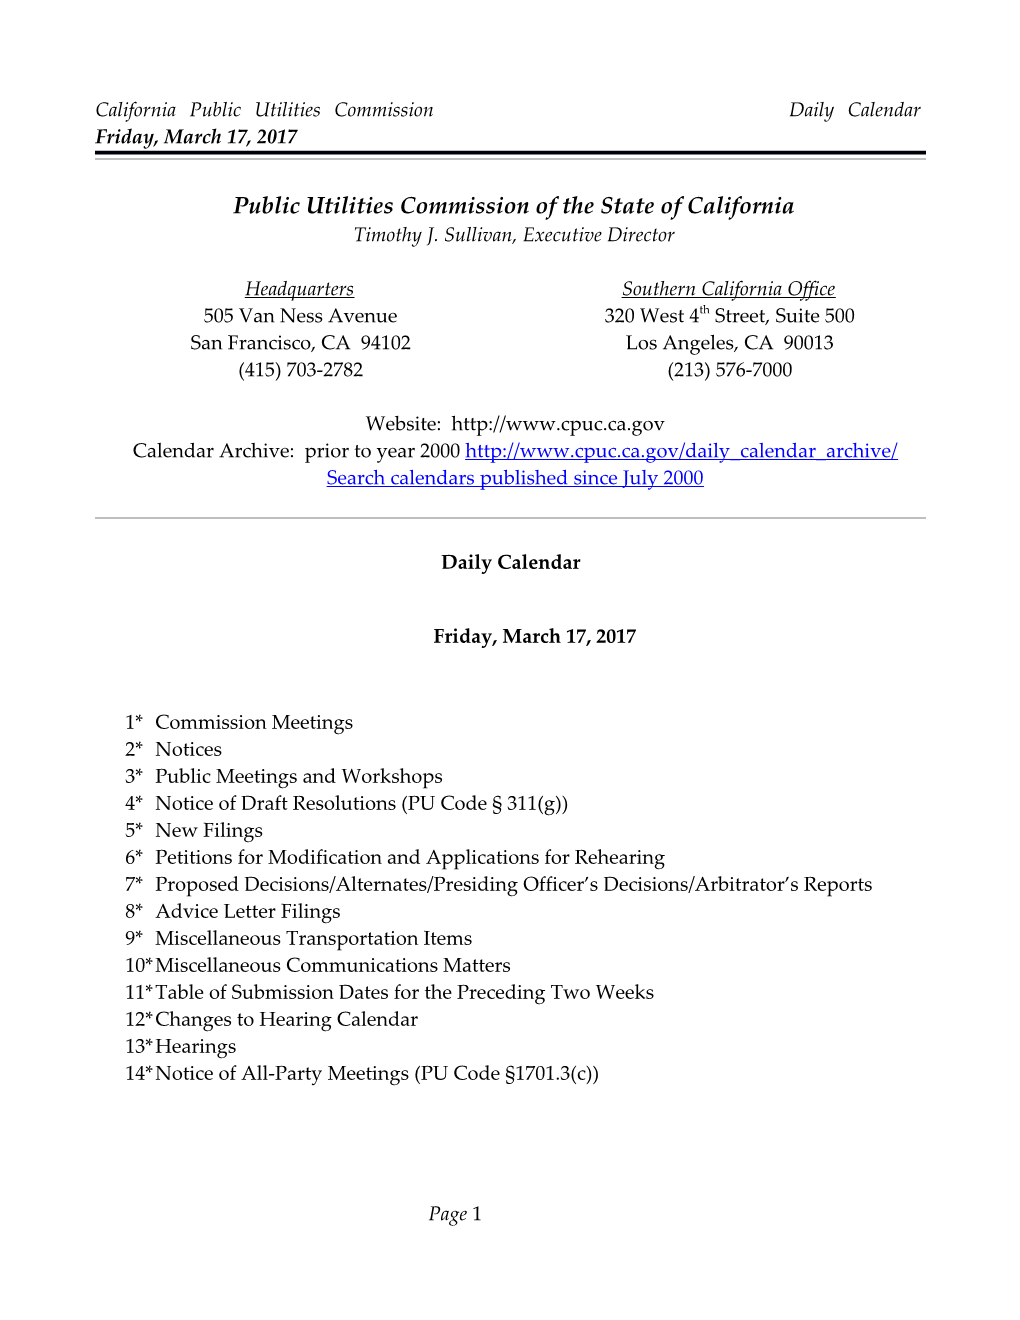 California Public Utilities Commission Daily Calendar Friday, March 17, 2017